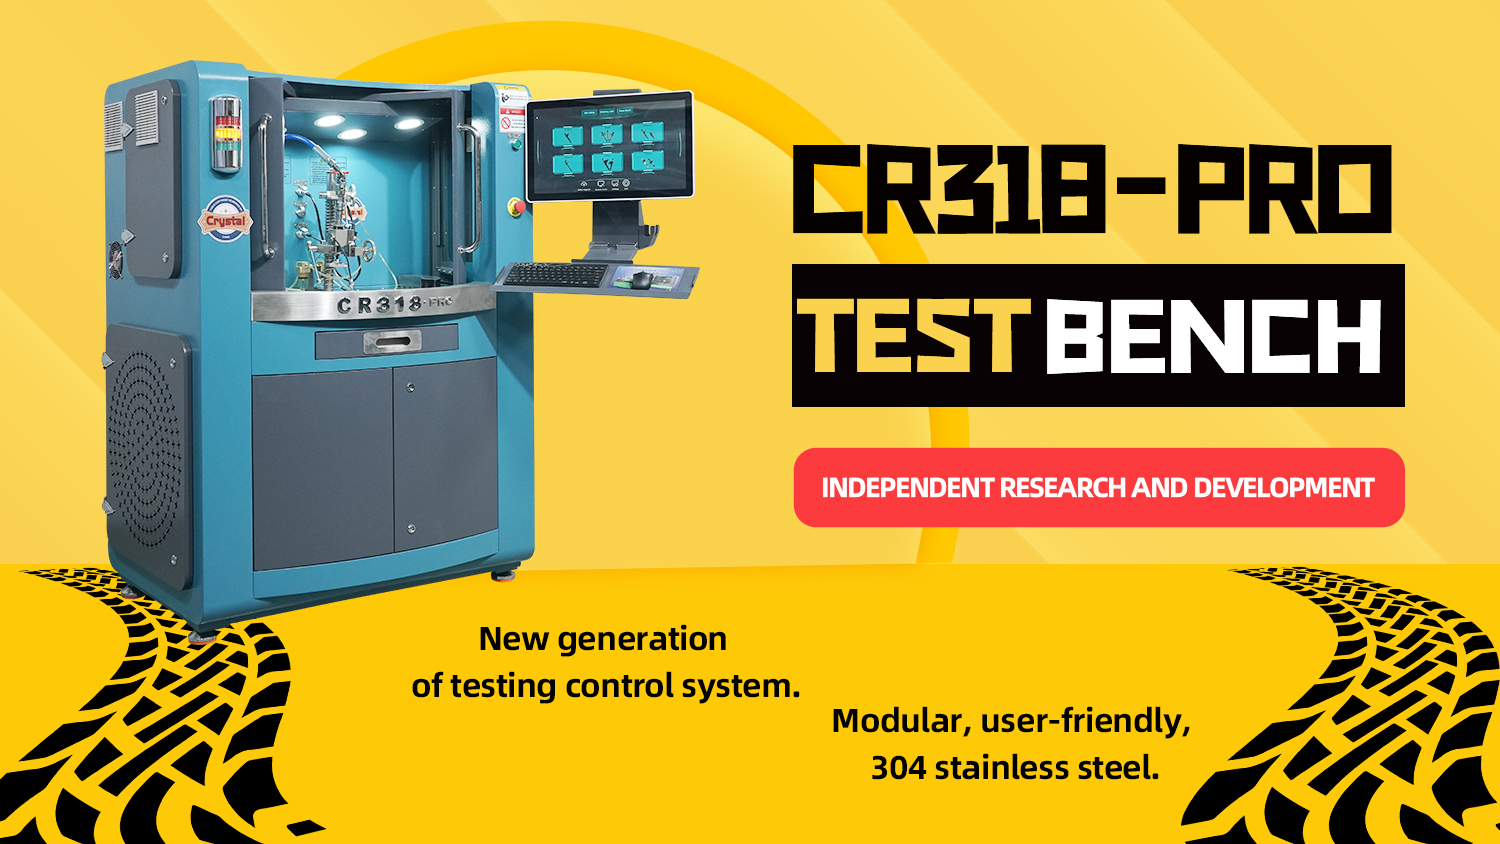 Common rail test bench brings you efficient work